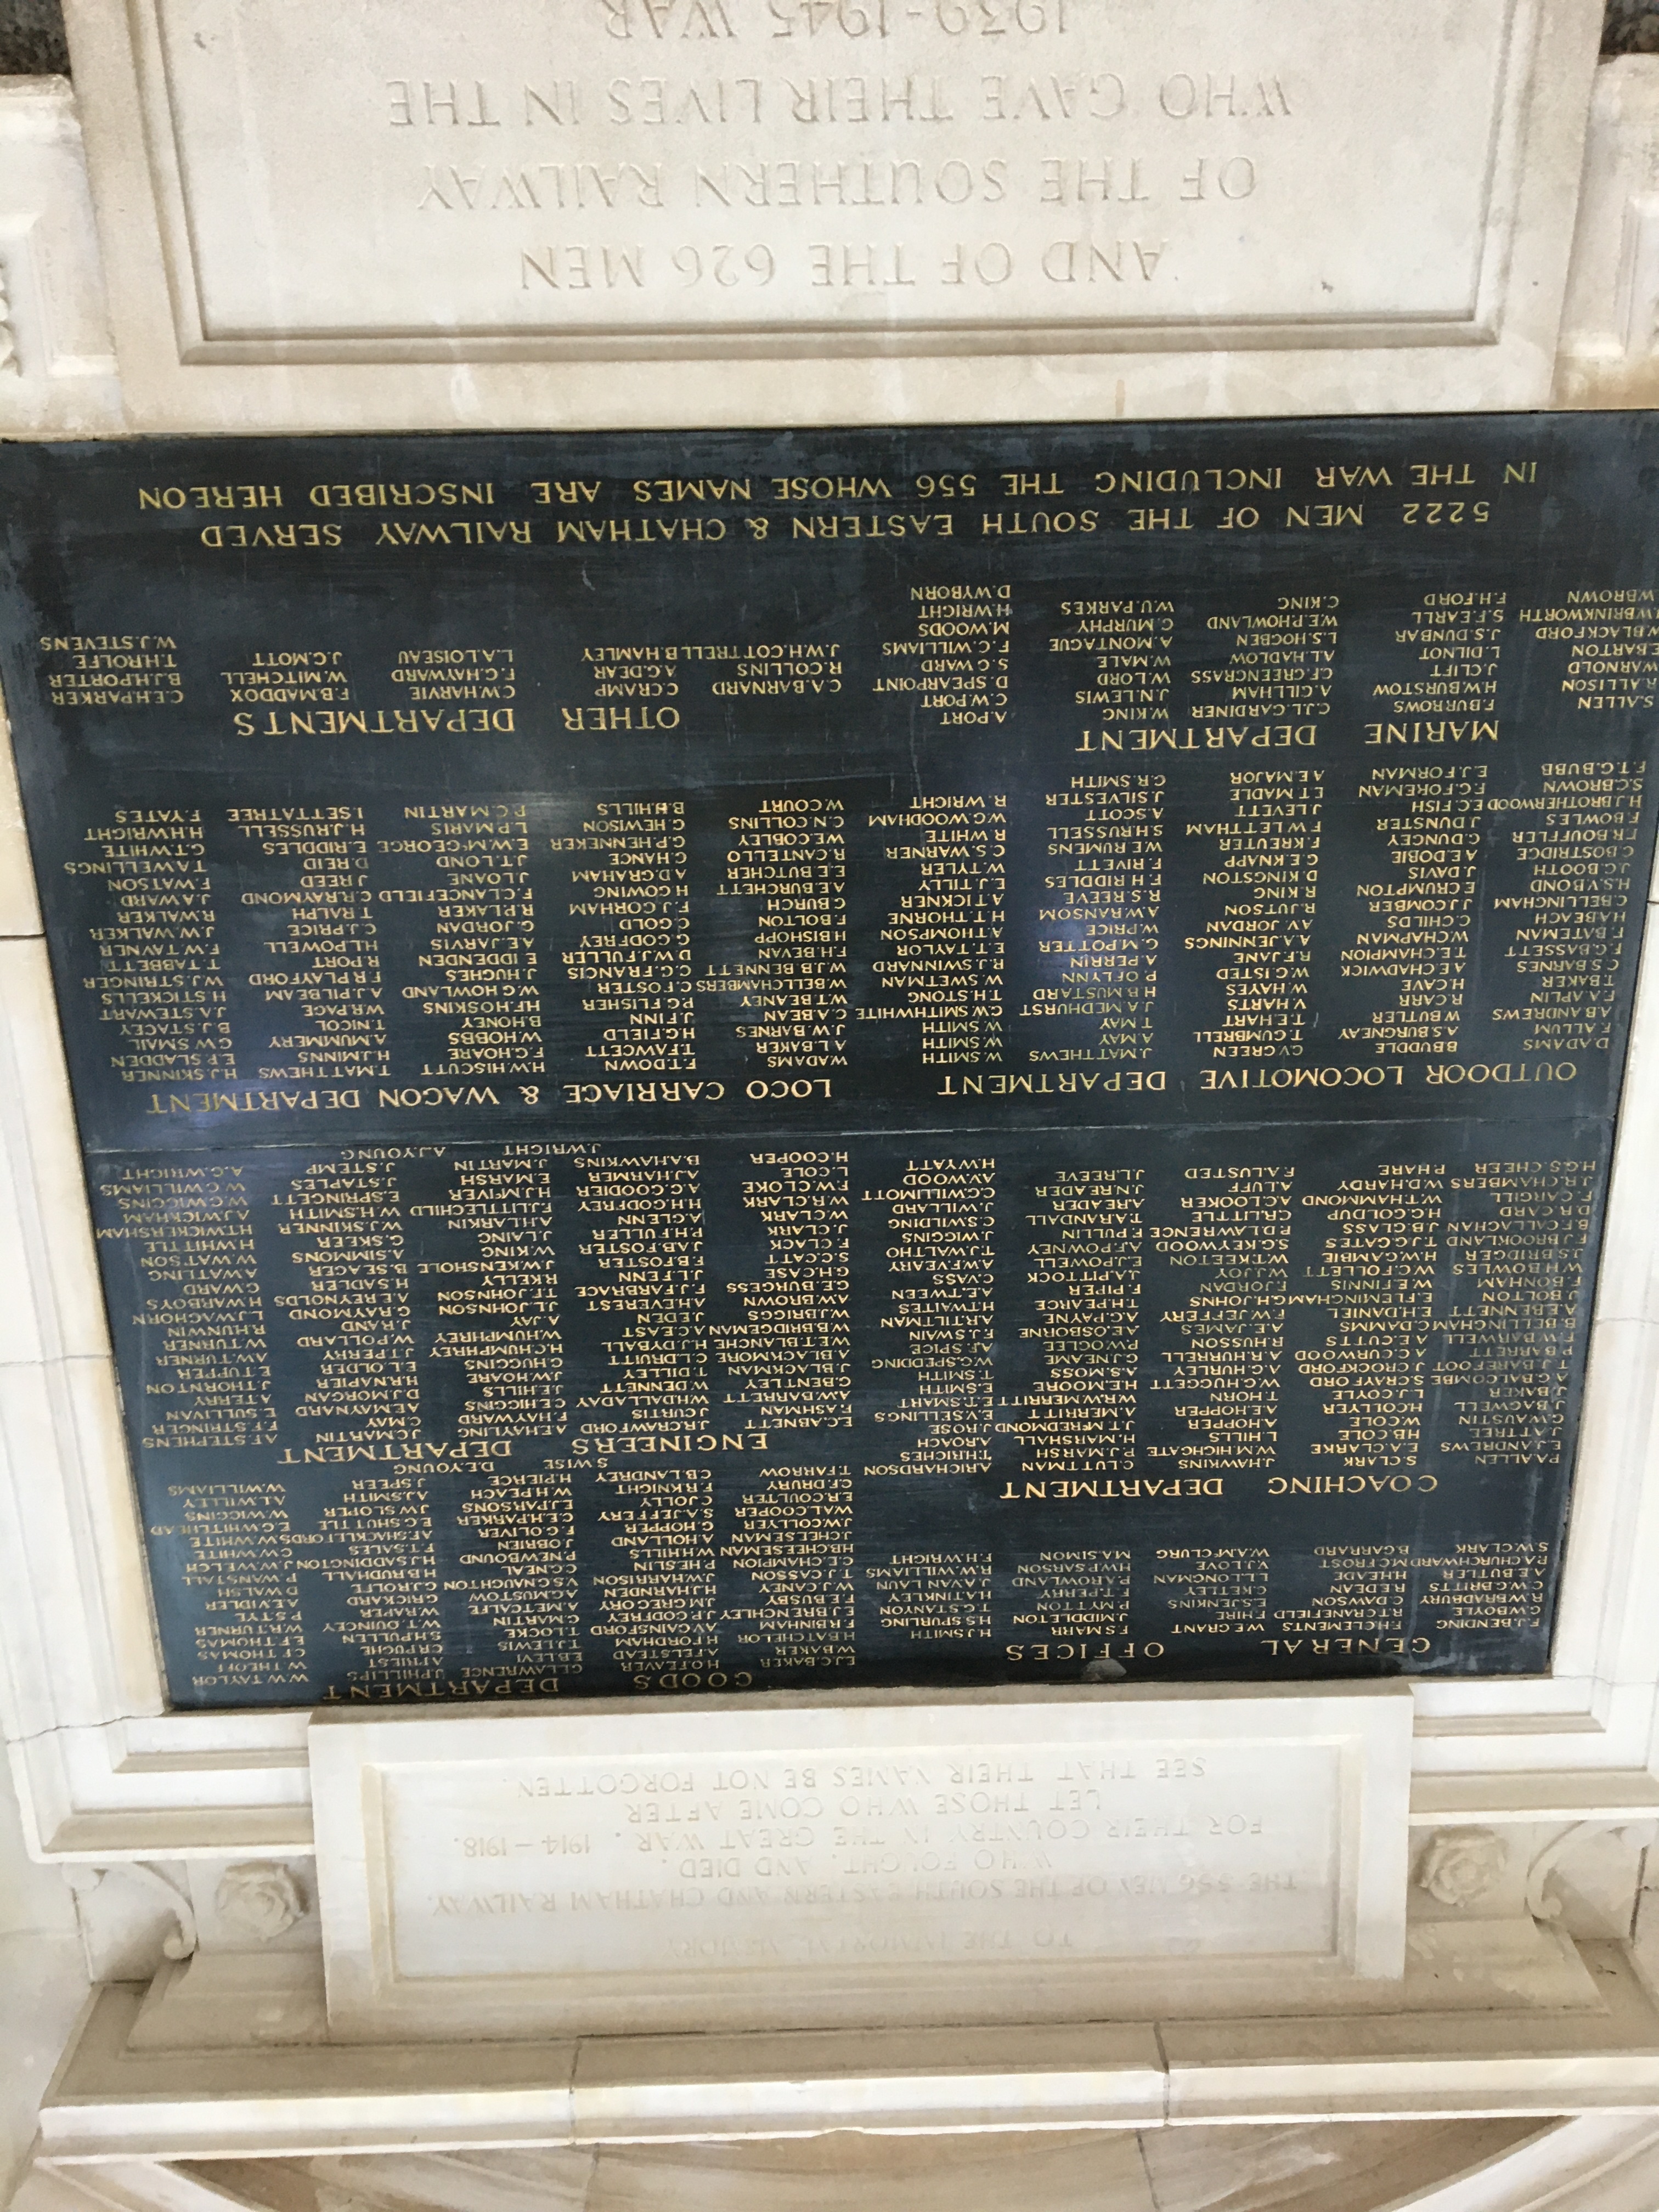 South Eastern And Chatham Railway And Southern Railway War Memorials Online